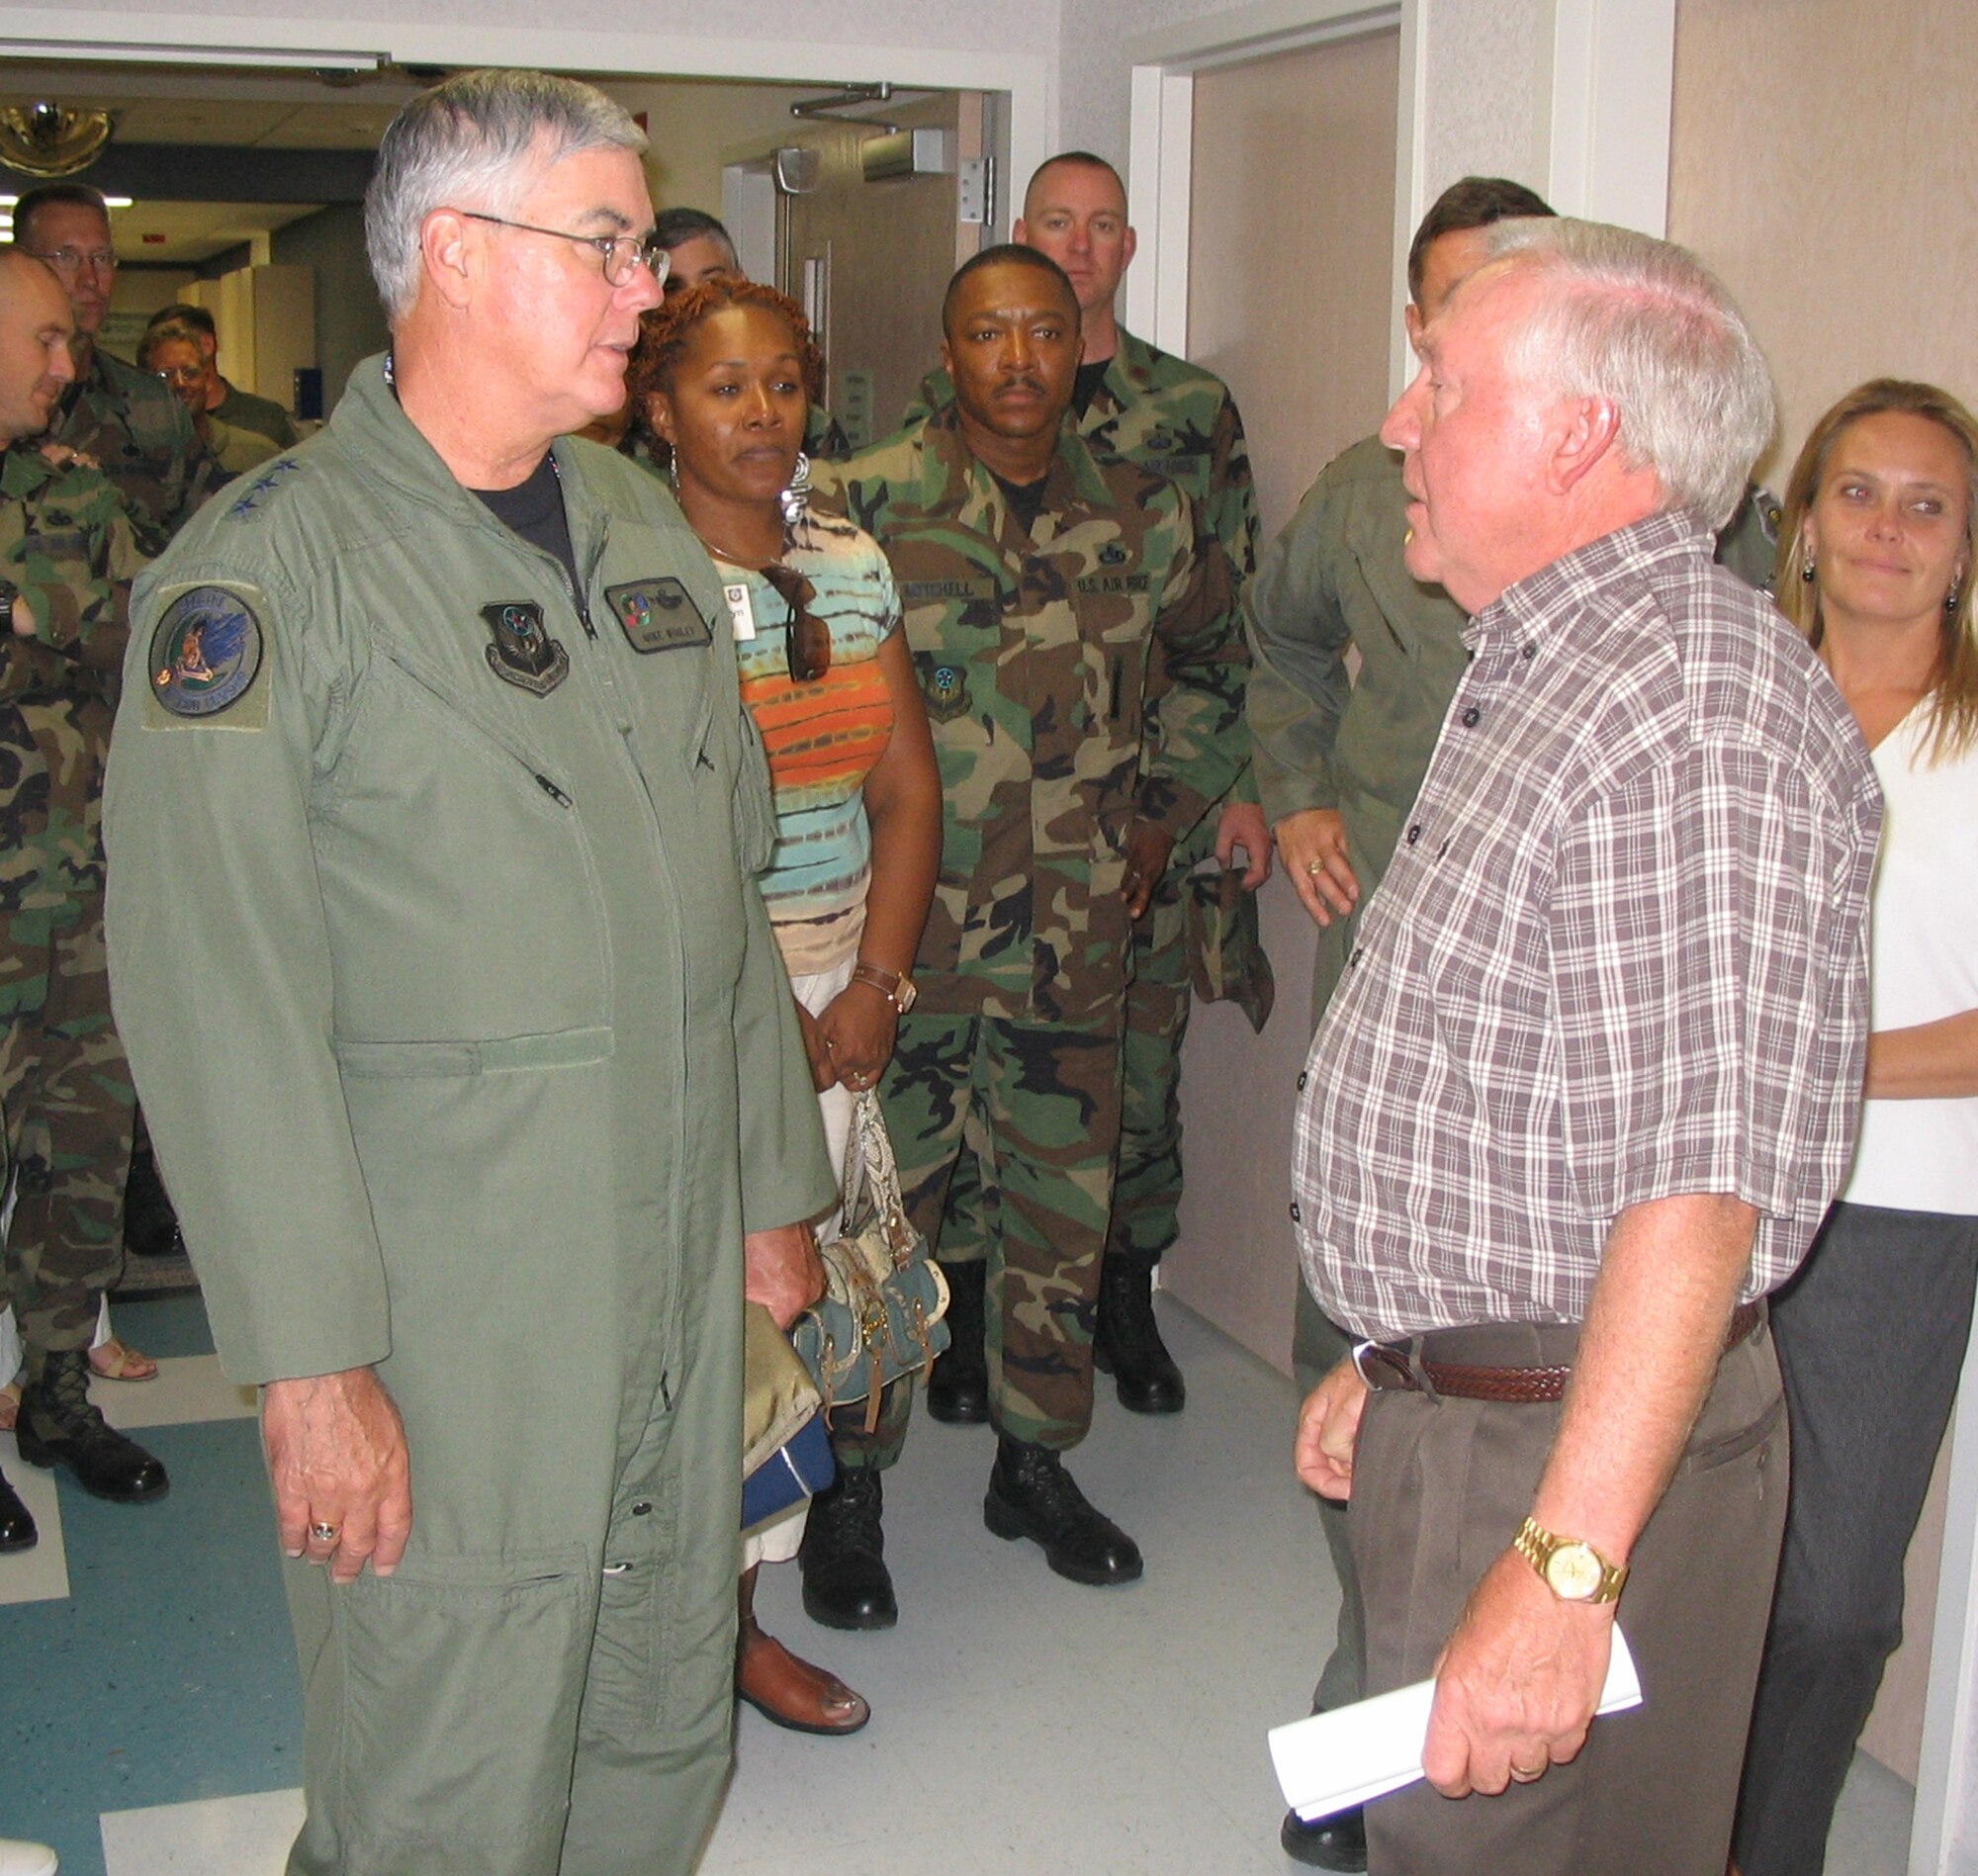 Lt. Gen. Michael Wooley, (left) Air Force Special Operations Command commander, speaks with James D'Agastino, Roosevelt General Hospital chief executive officer administrator, about the services the facility provides to residents during the group's visit to Portales, N.M.  The 12,000-person city is approximately 12 miles from Cannon Air Force Base.  (U.S. Air Force Photograph by Lt. Amy Cooper)